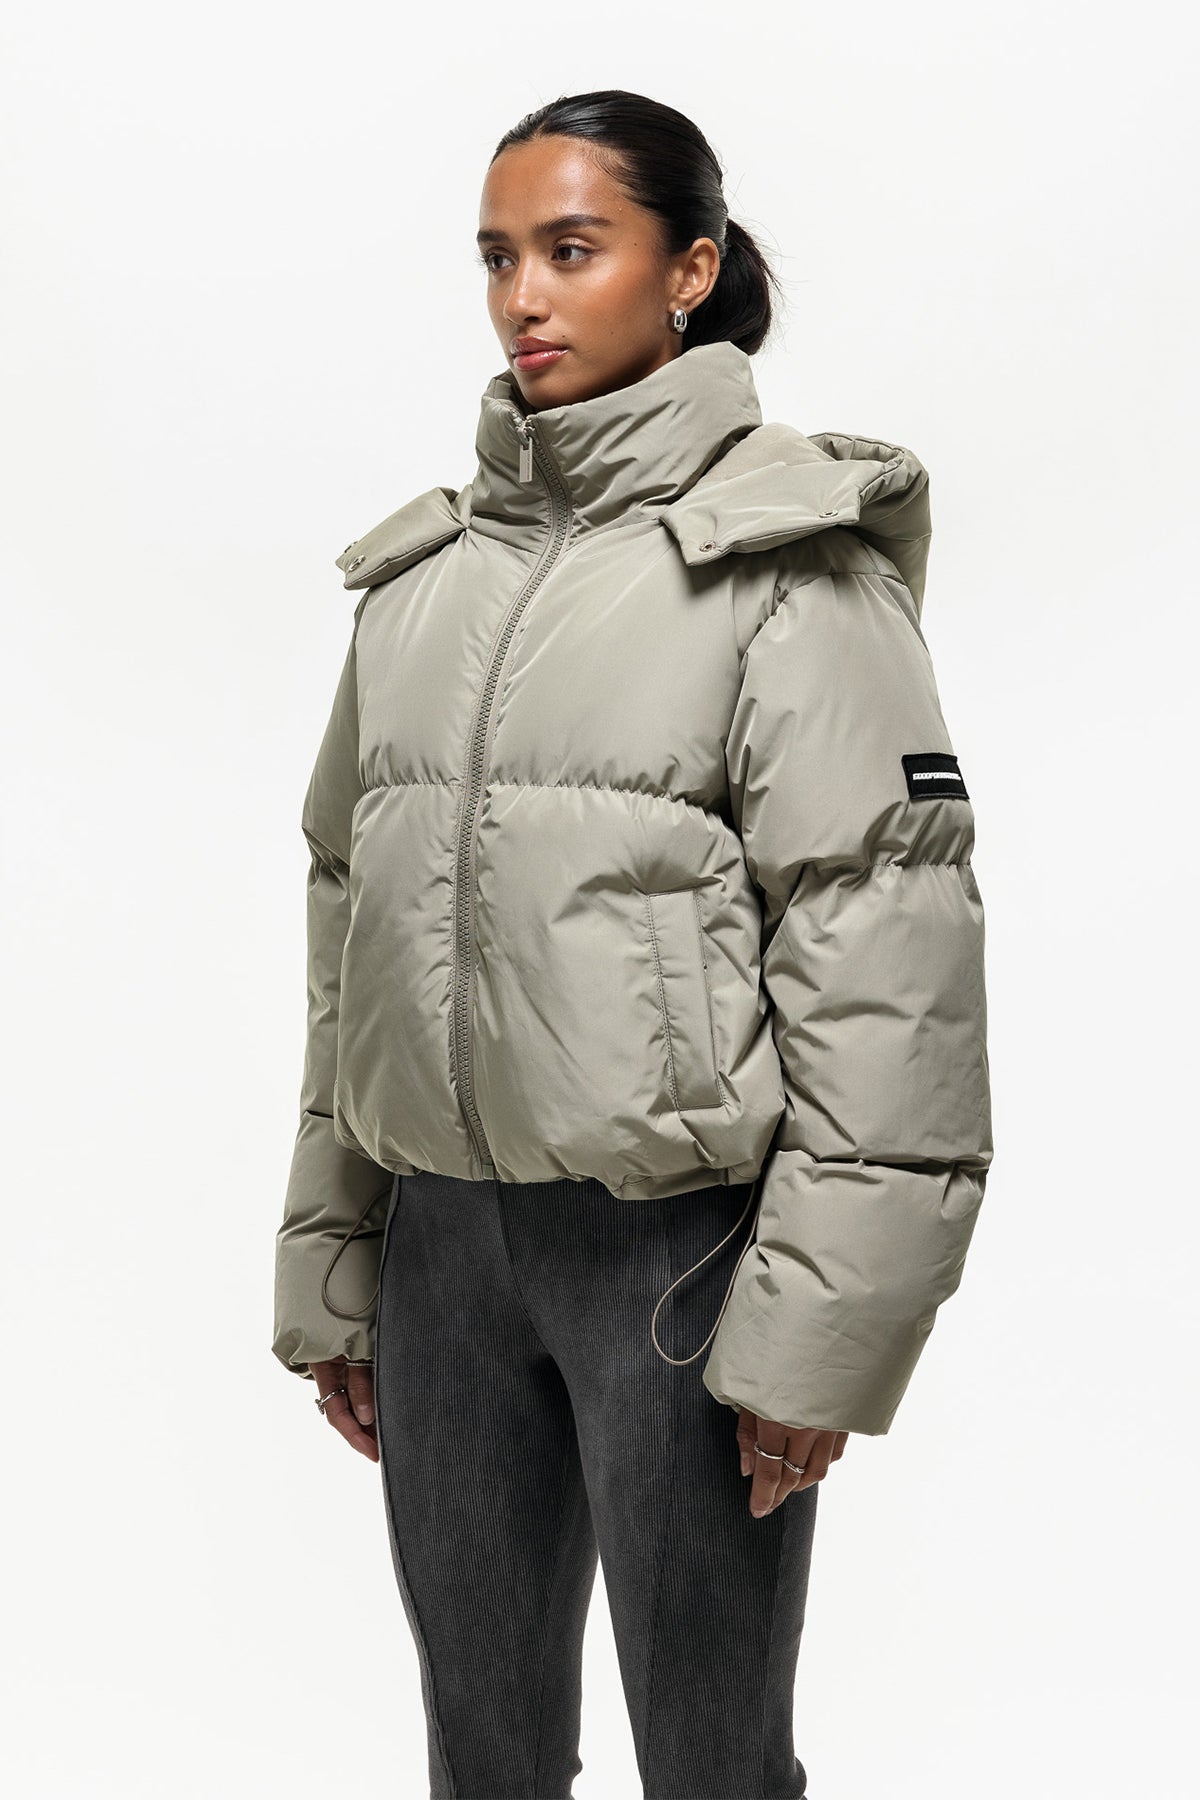 Luxe Sage Green Cropped Puffer Jacket